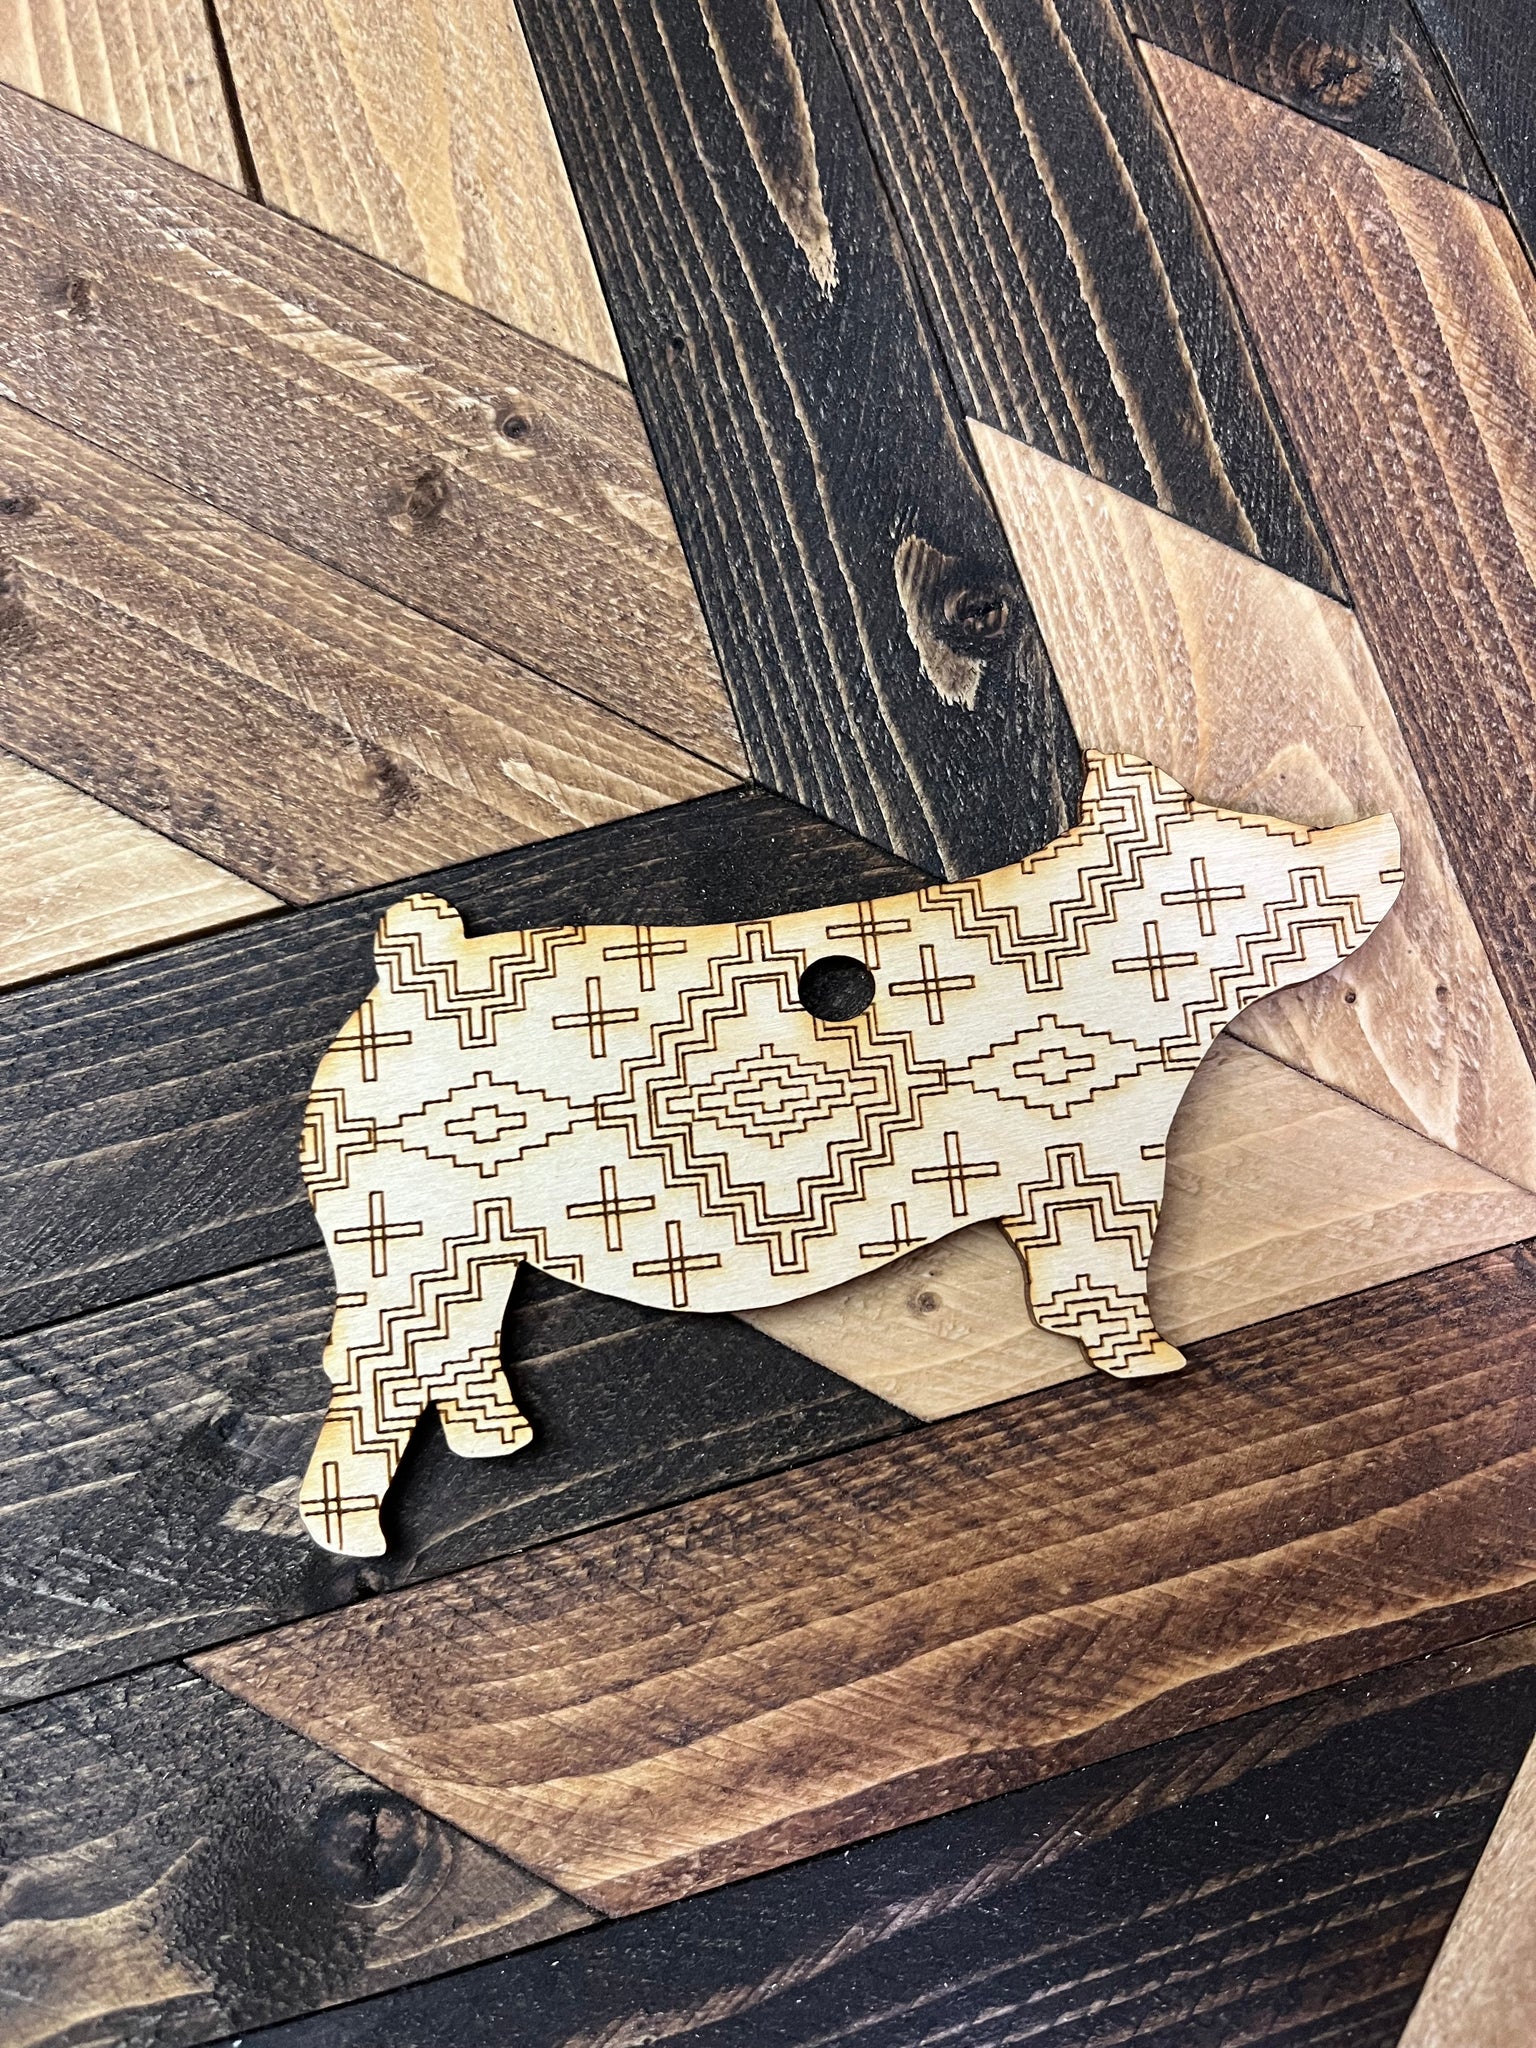 Pig Ornament (Style 2)